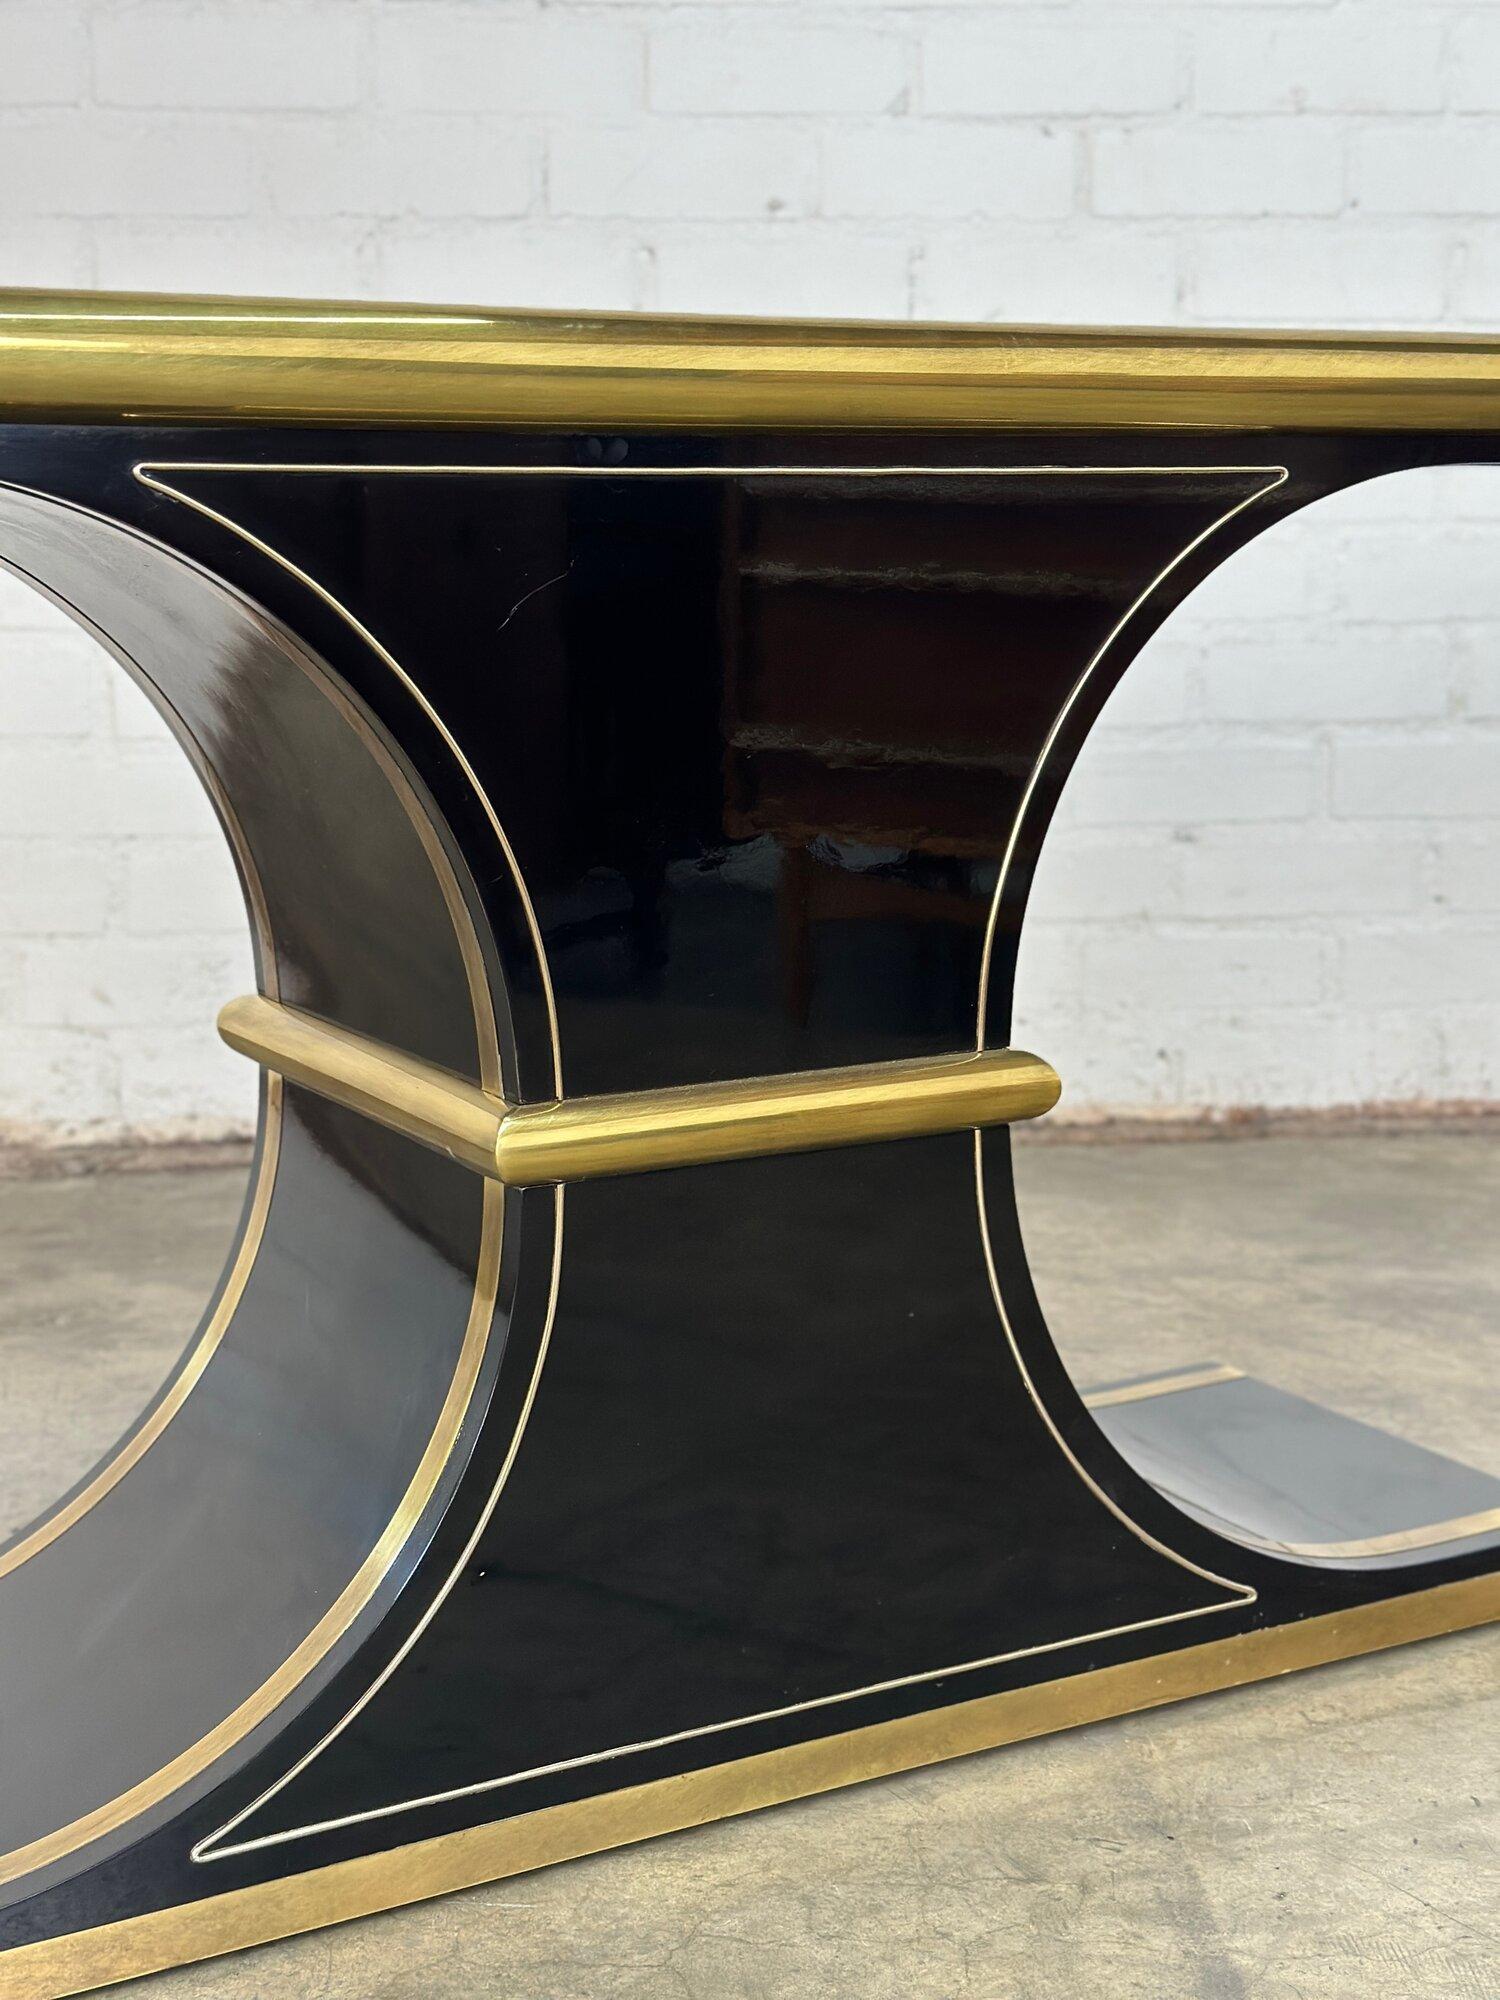 W60 D17 H30

Mastercraft Console table in brass and black lacquer. Console table is strucutrally sound and overall shows well with visble cracks or chips. Surface does show normal surfac scratches. 

